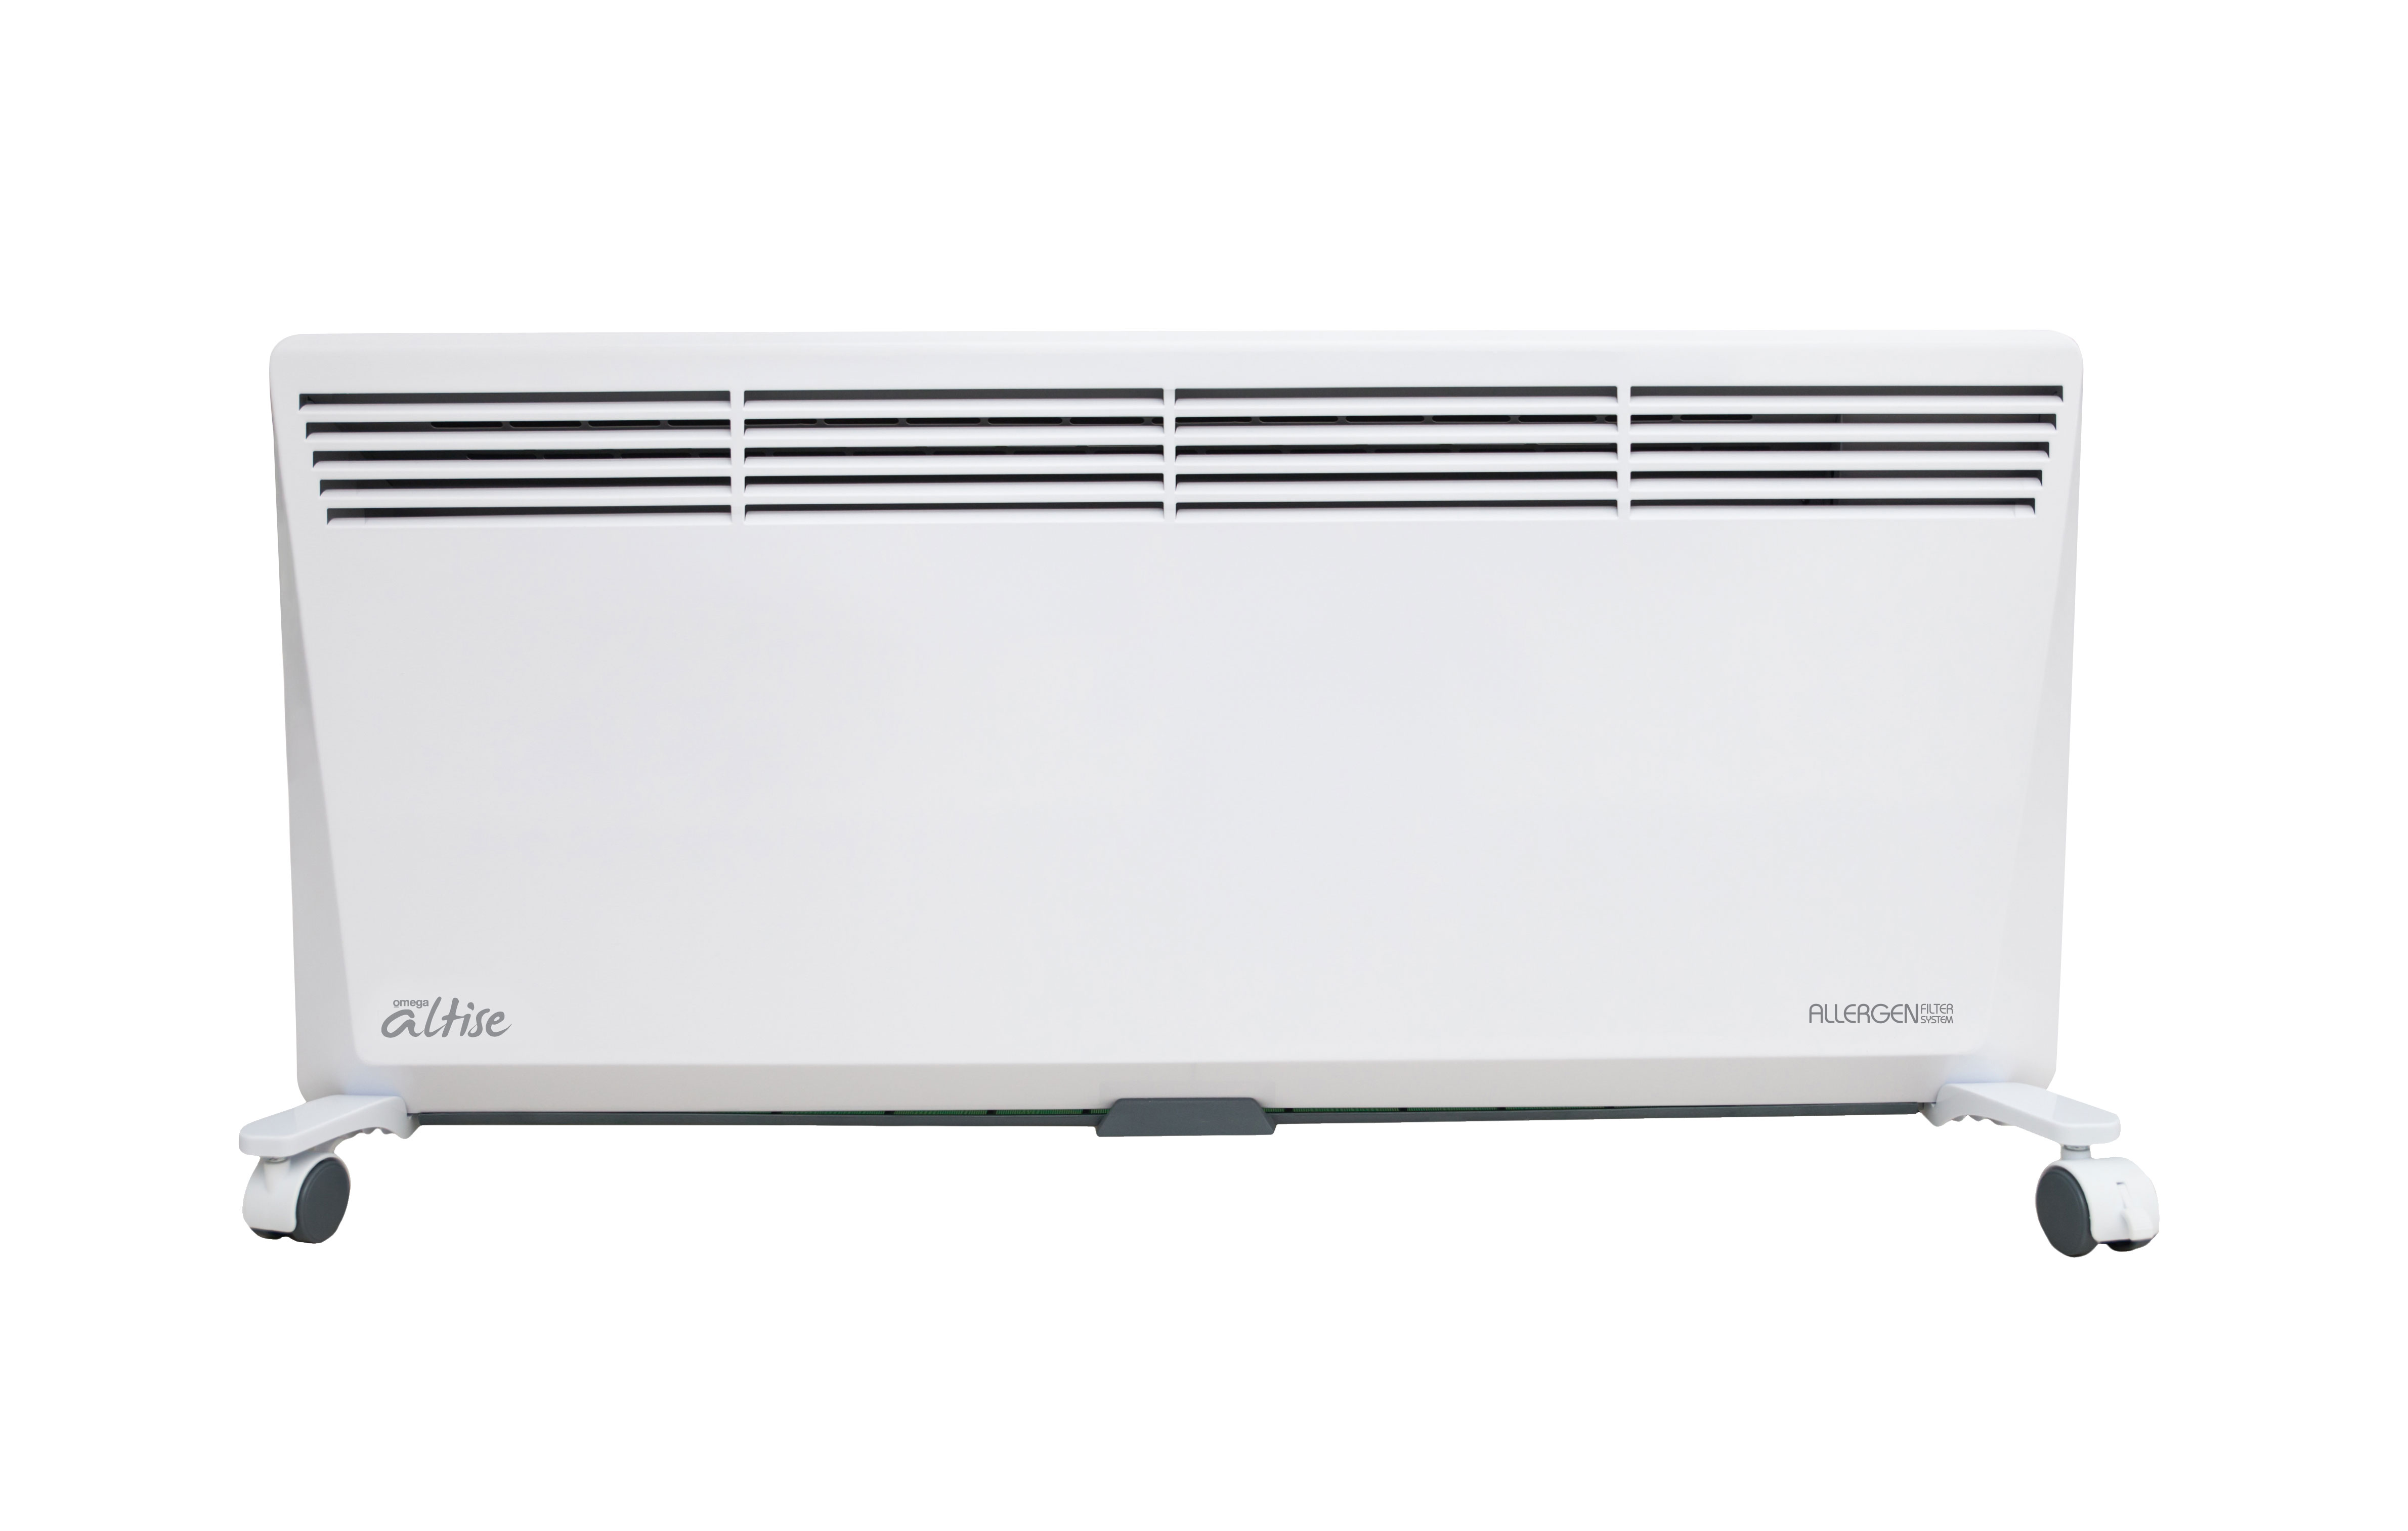 Omega Altise Product Panel Heater - With Filter&nbsp;2400W&nbsp;&nbsp;(ANPE2400W)